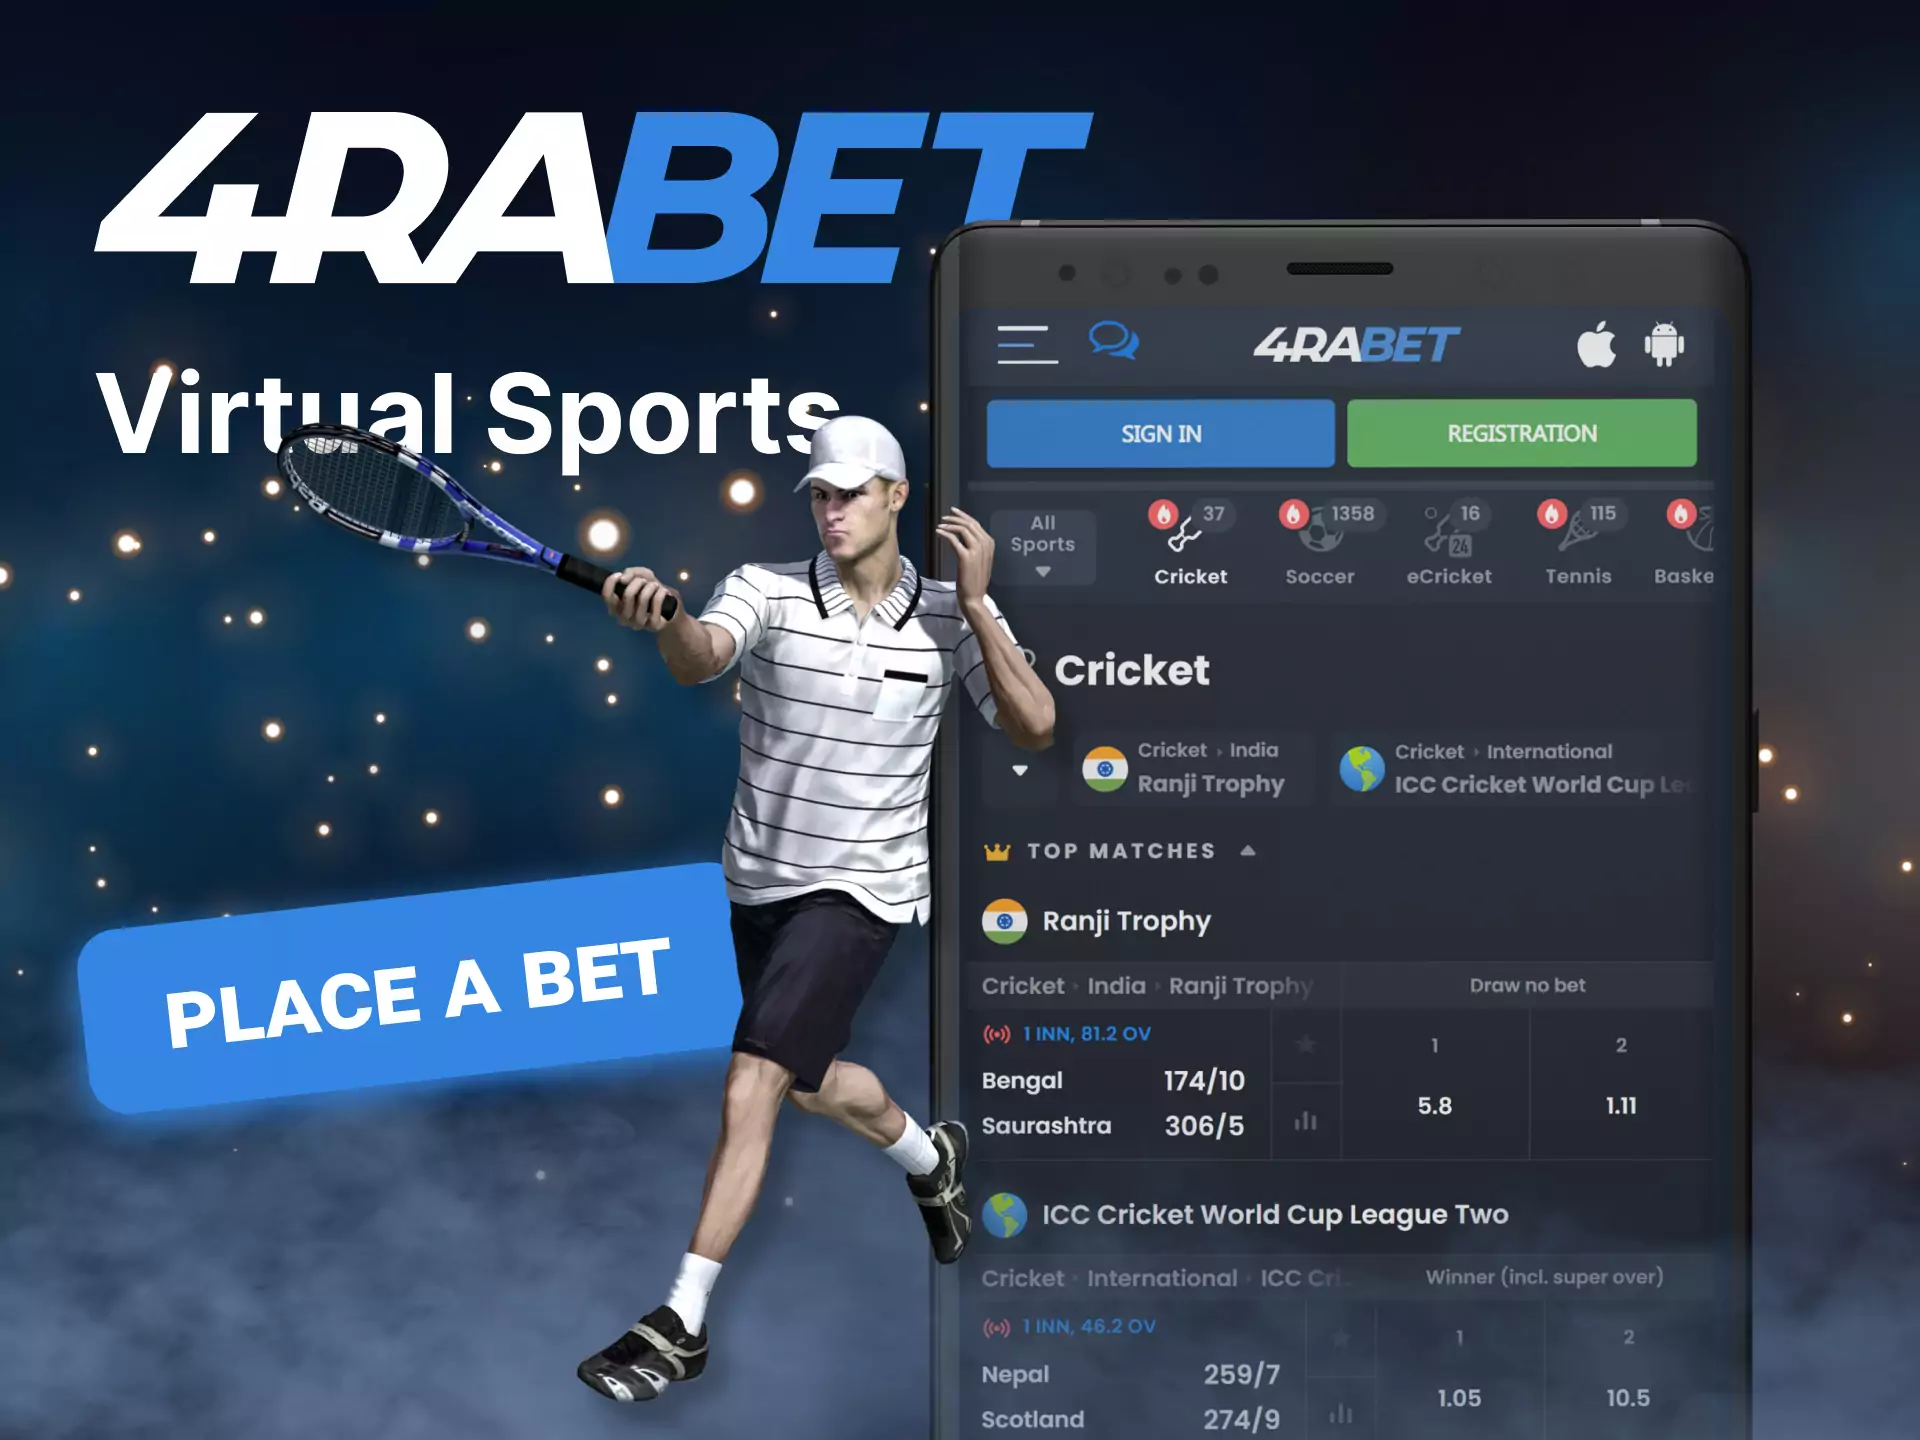 With the 4rabet app, bet on virtual sports.